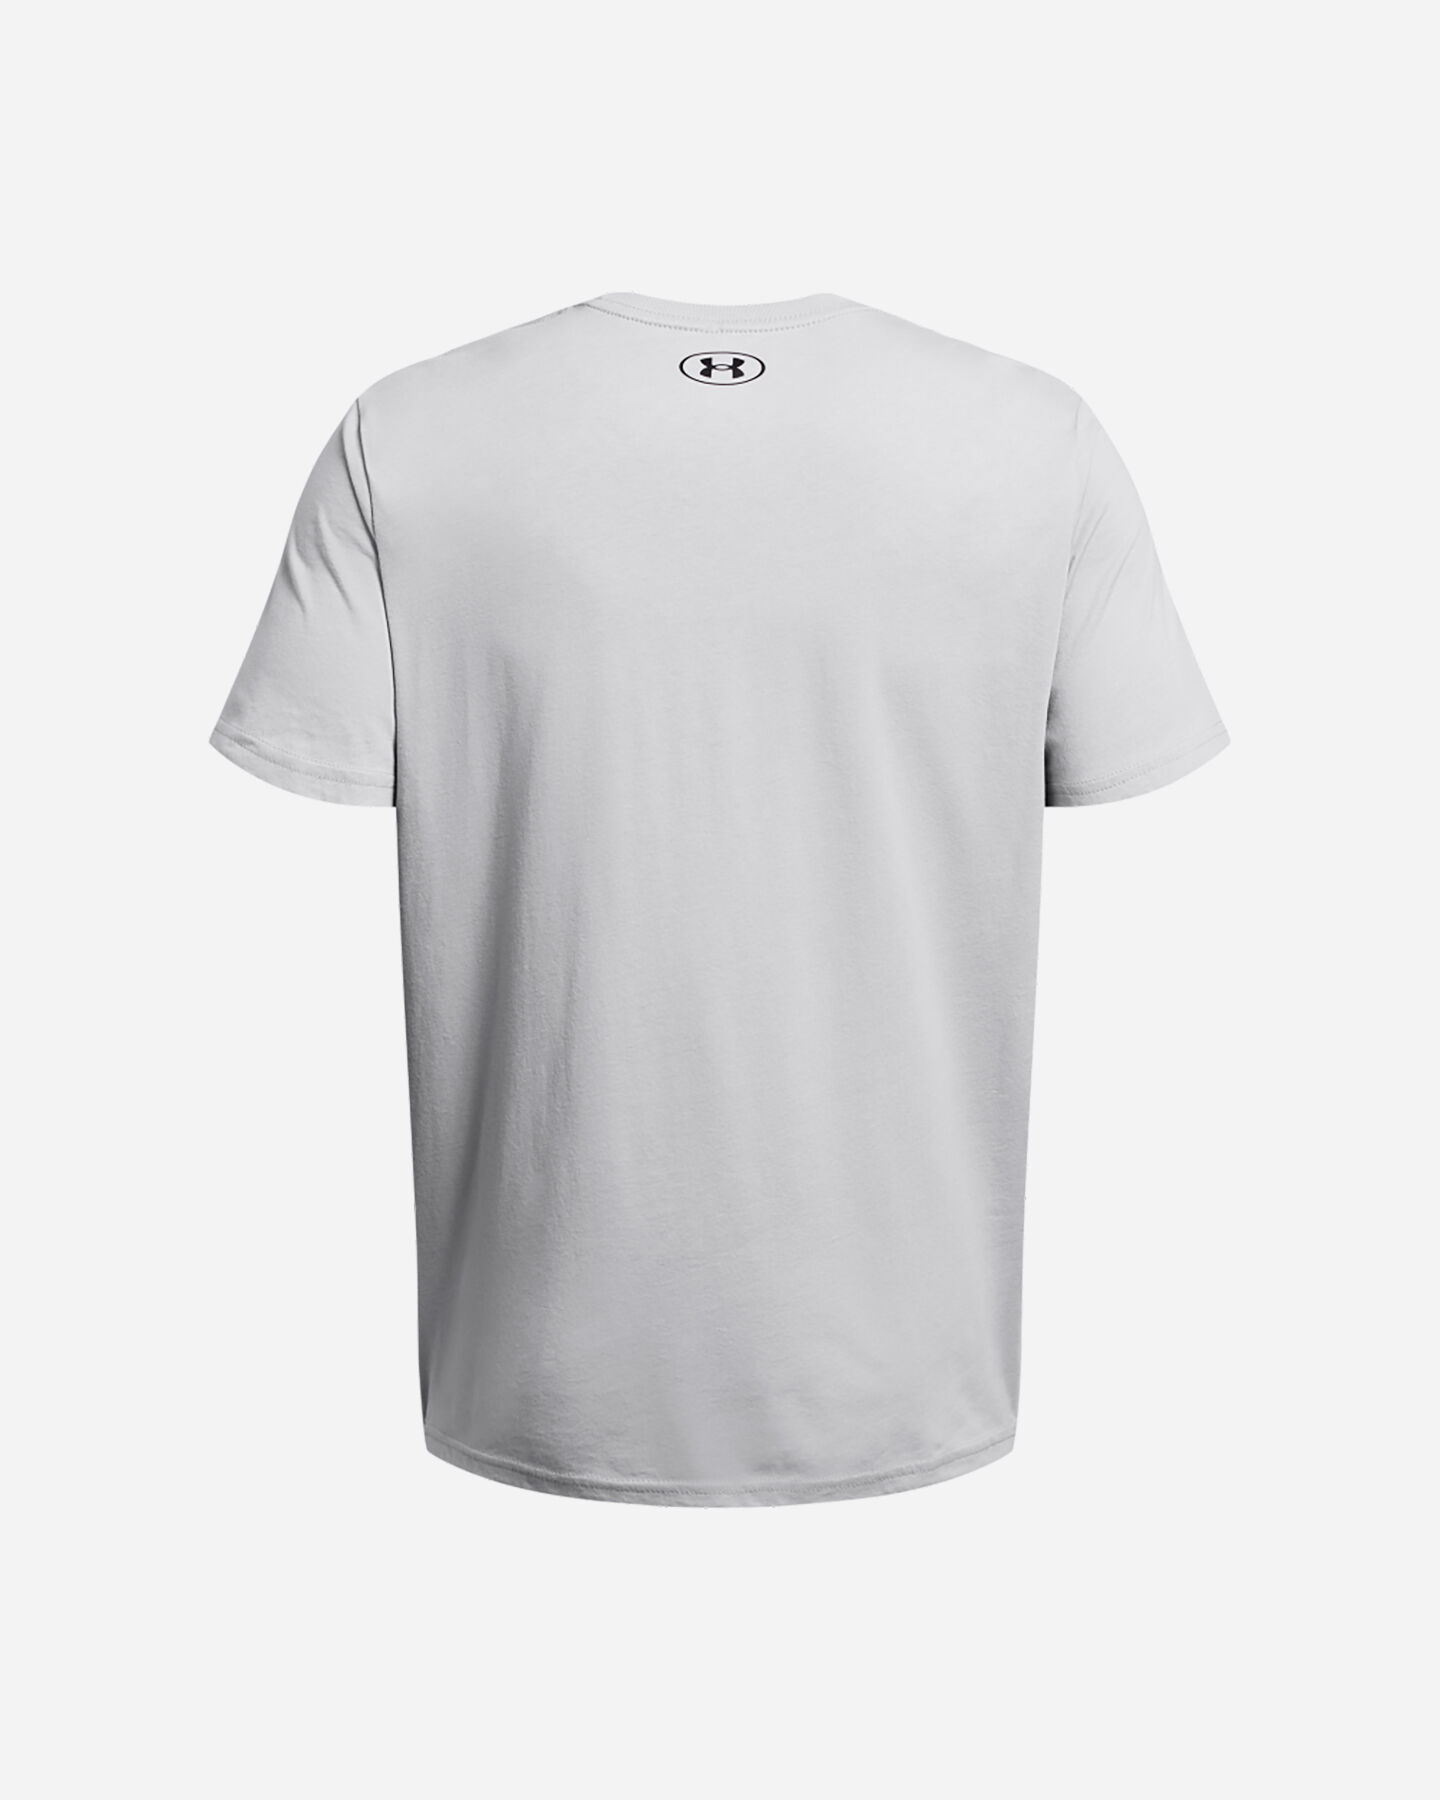  T-Shirt UNDER ARMOUR COLOR BLOCK M S5641615|0011|SM scatto 1